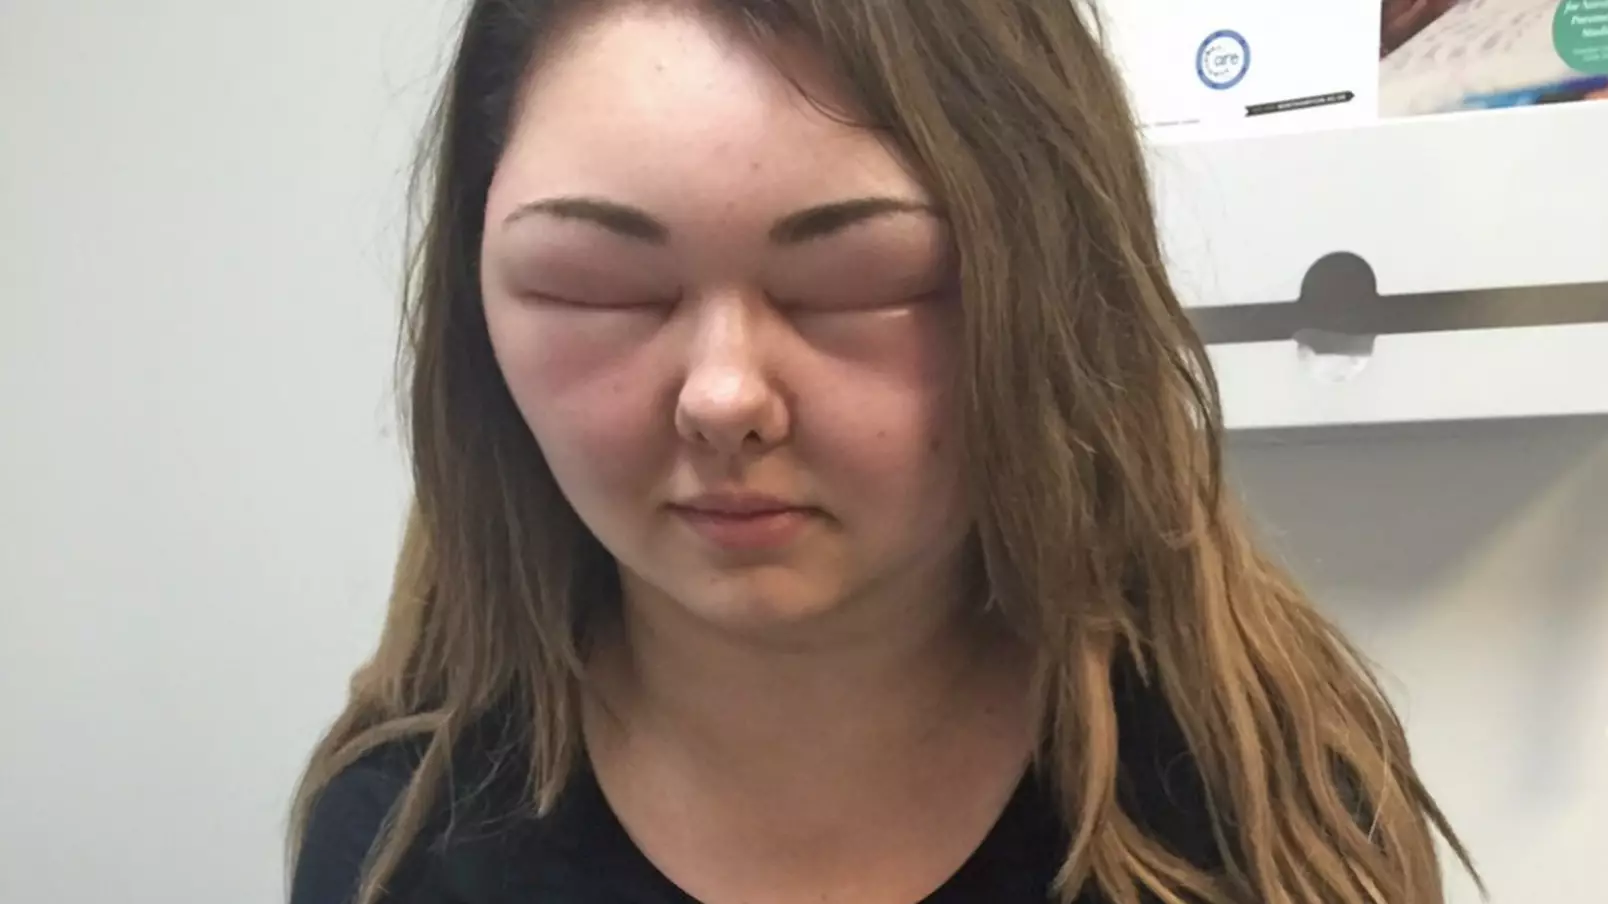 Woman Blinded After Allergic Reaction To Hair Dye Causes Head To Swell Like 'Alien'